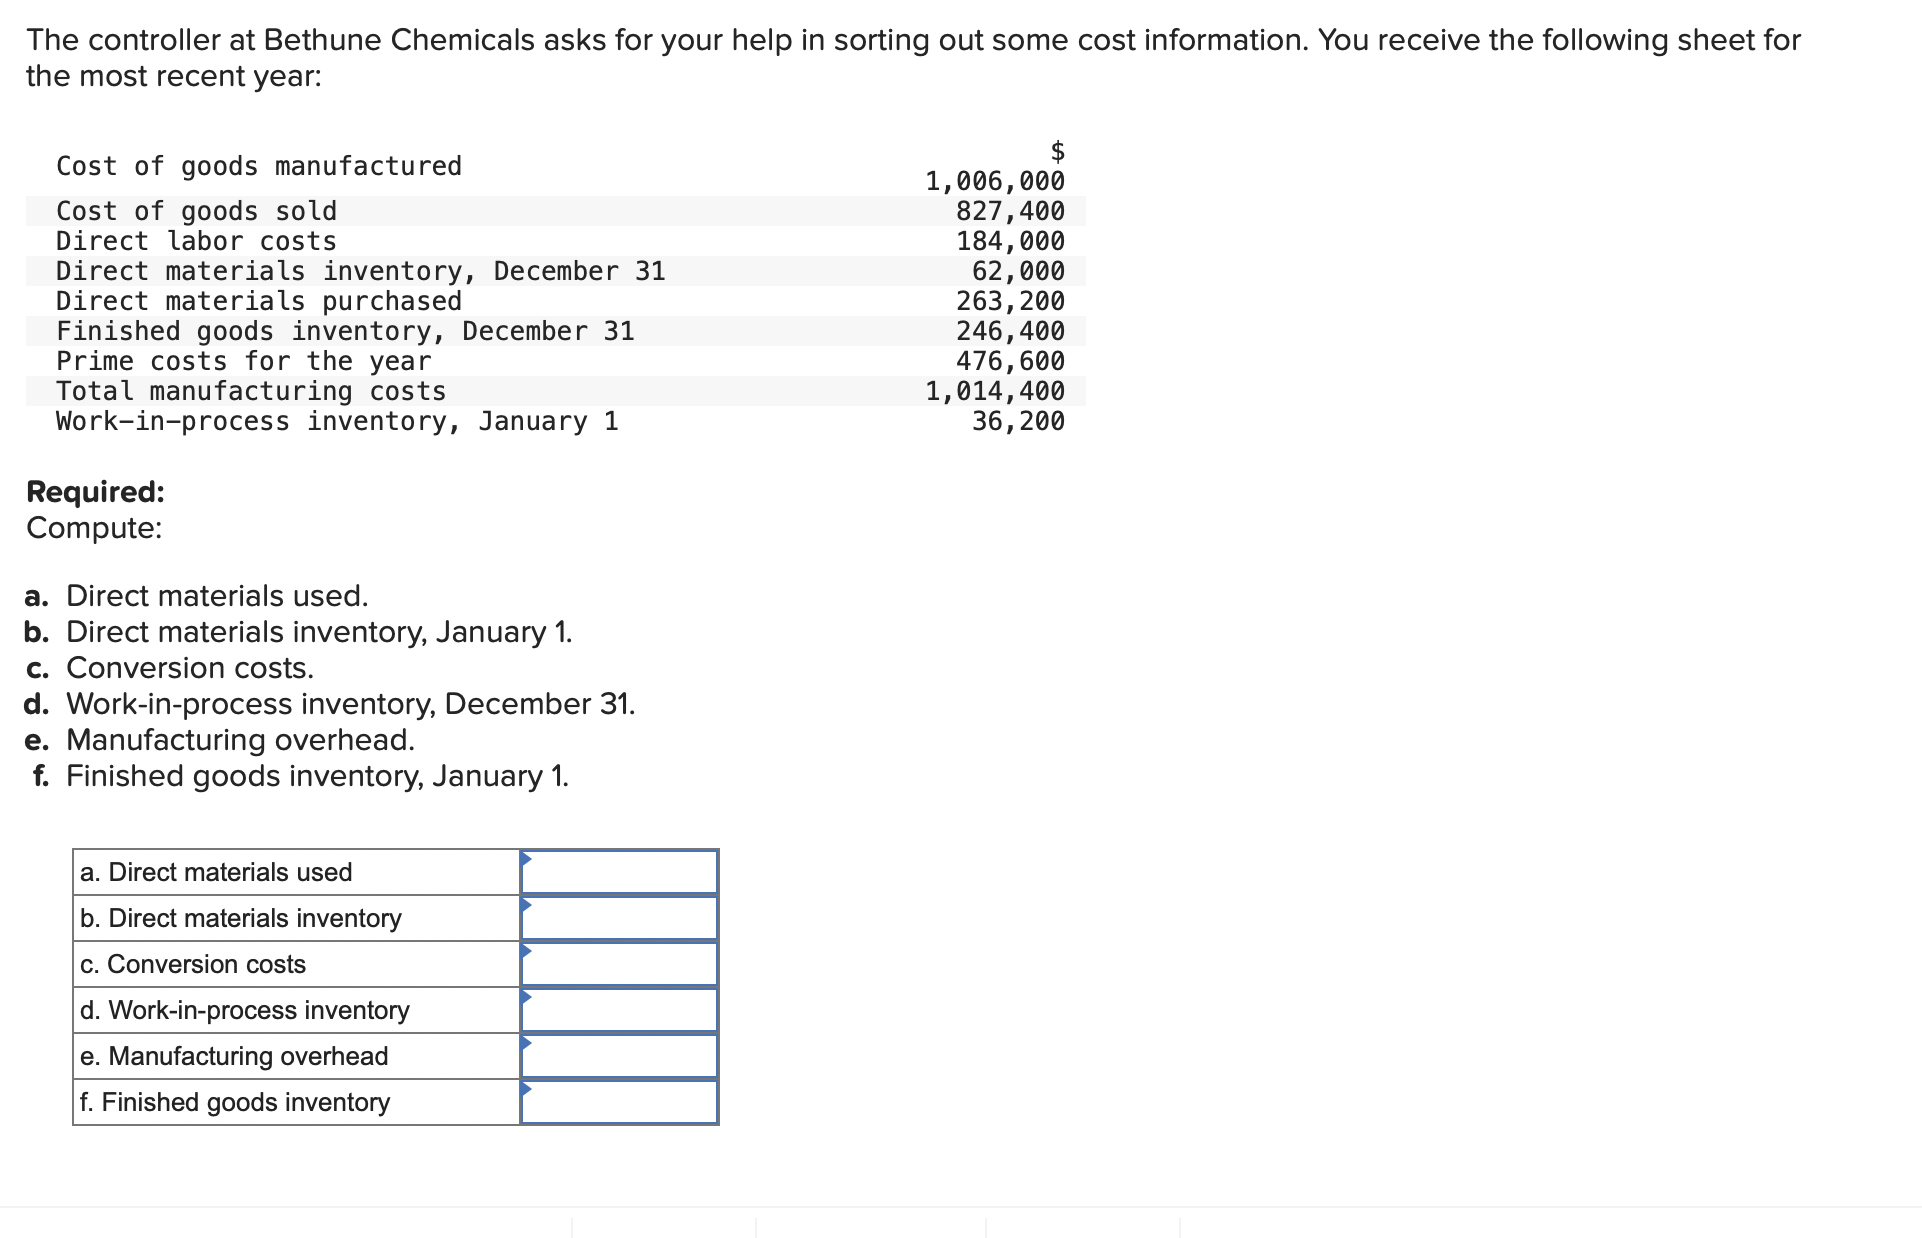 The controller at Bethune Chemicals asks for your help in sorting out some cost information. You receive the